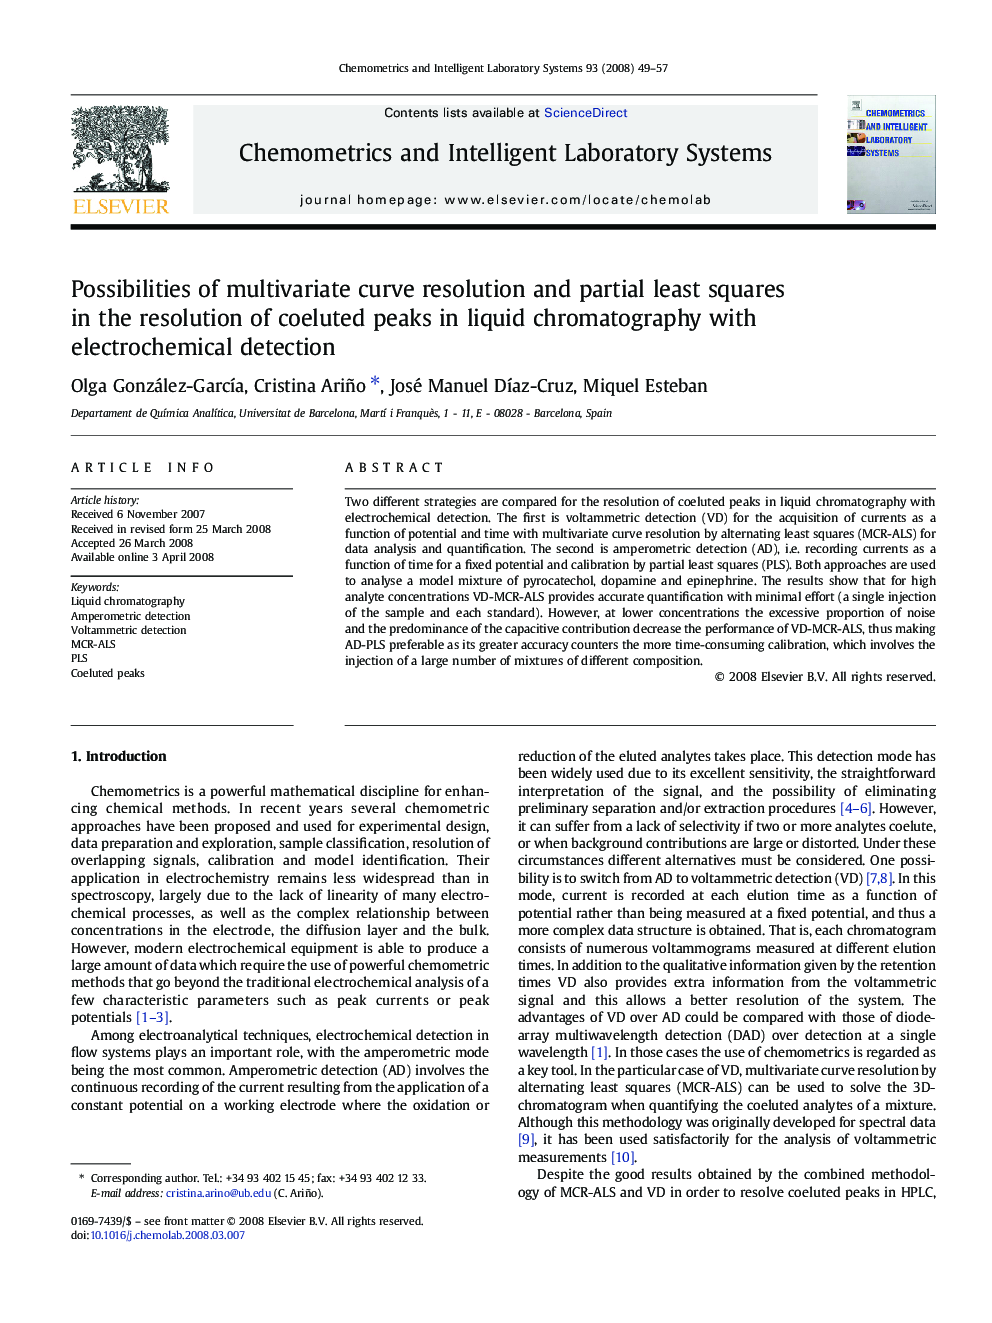 Possibilities of multivariate curve resolution and partial least squares in the resolution of coeluted peaks in liquid chromatography with electrochemical detection